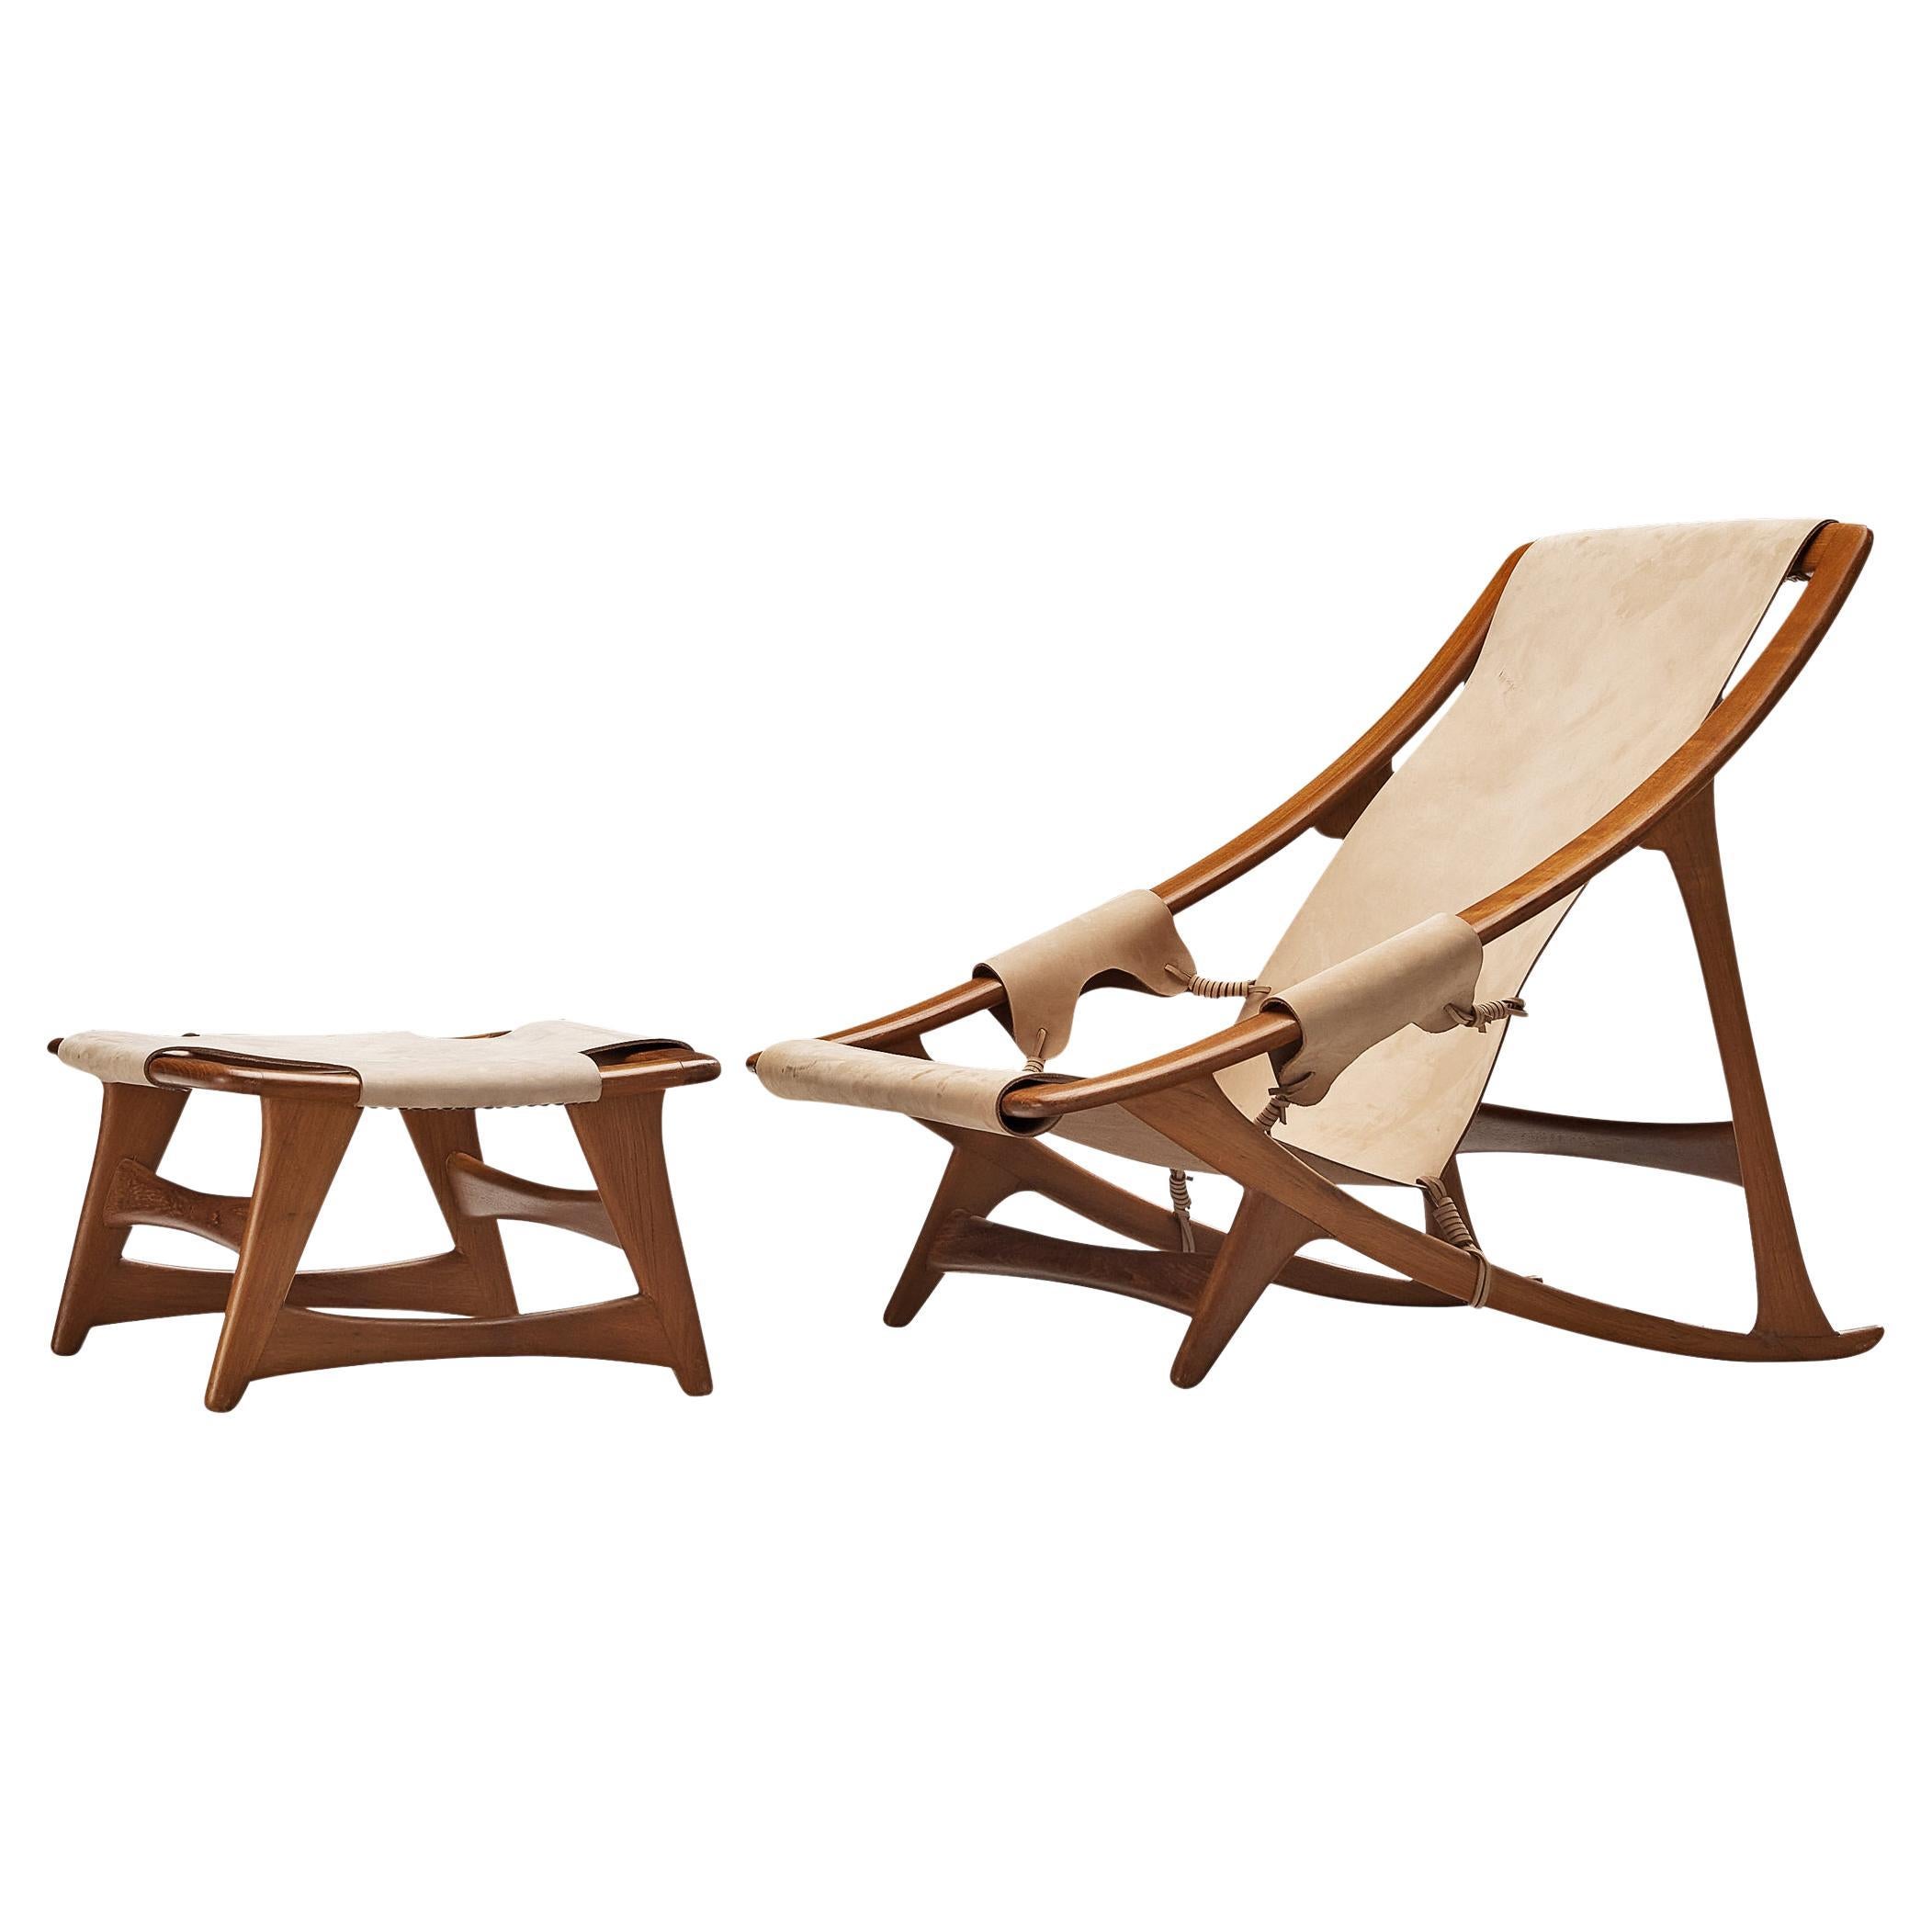 W.D. Andersag Lounge Chair with Ottoman in Teak and Leather 